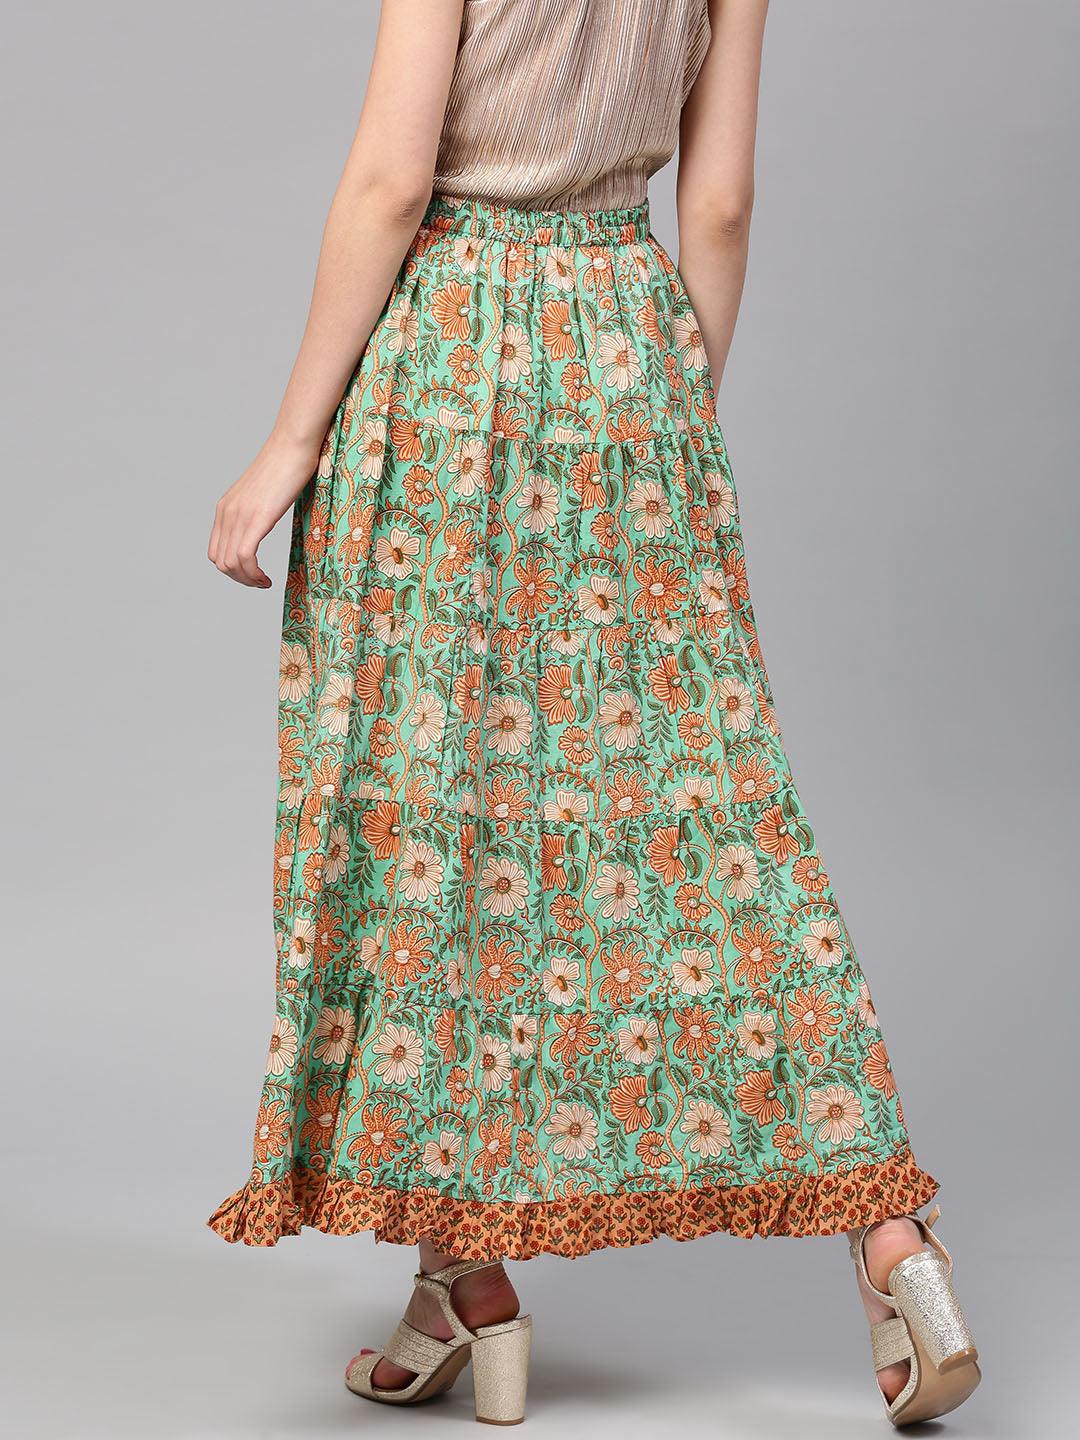 Green Floral Pastel Printed Flared Skirt With Frill Hemline - Znxclothing